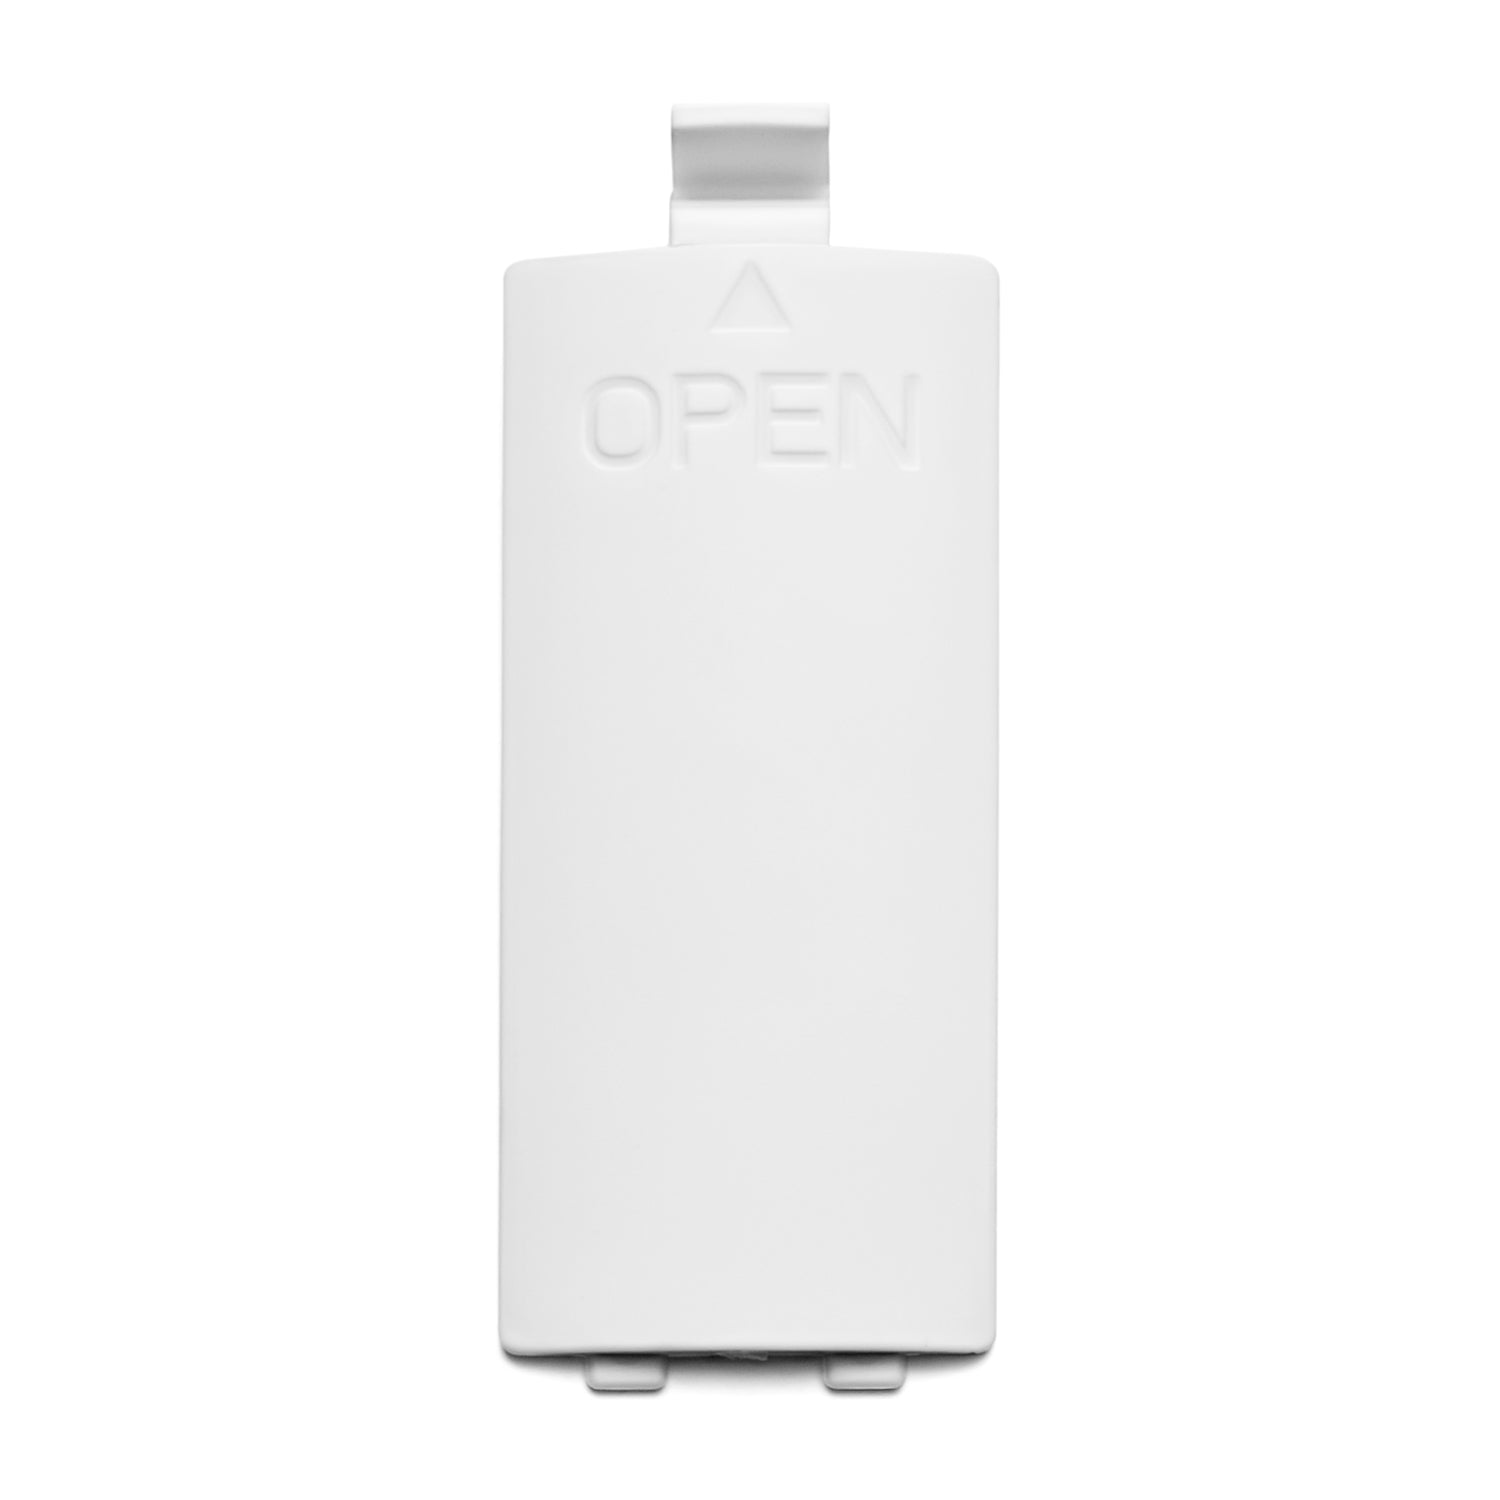 GS24-Battery Cover